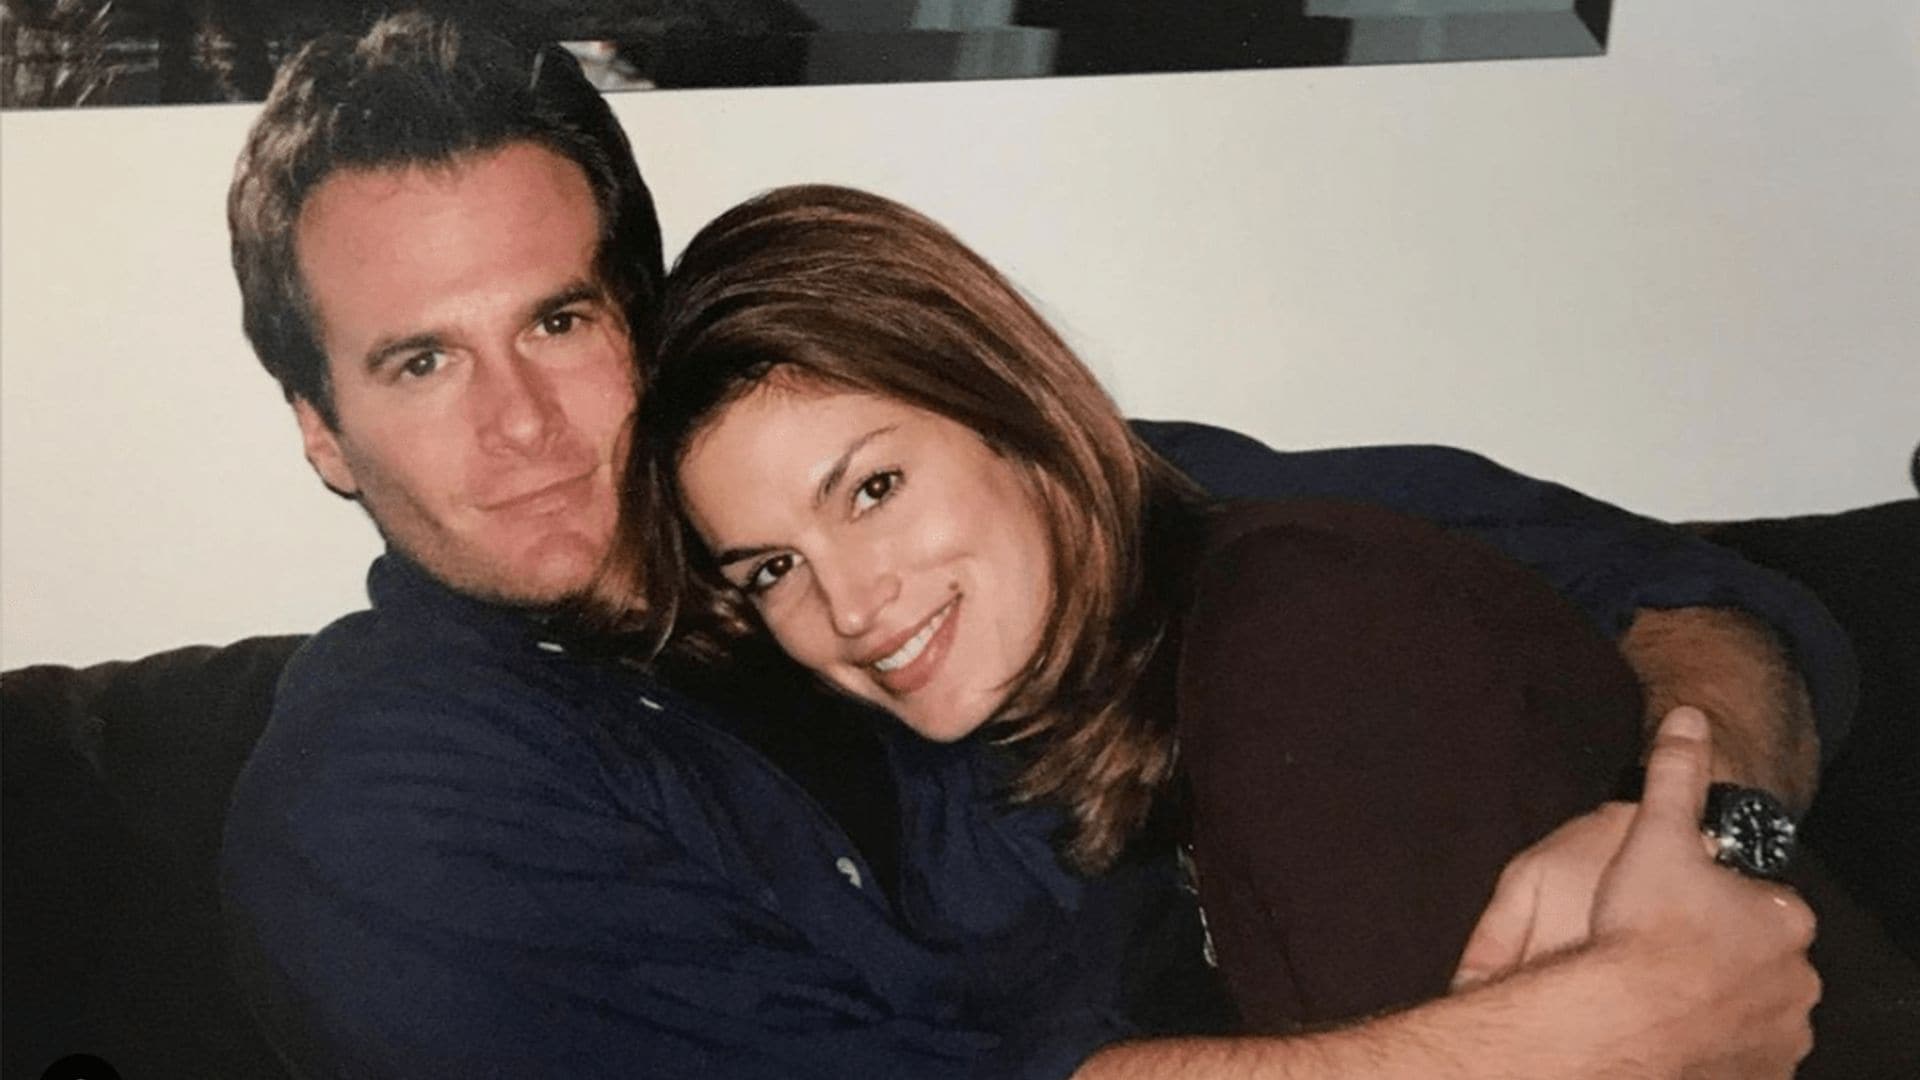 Cindy Crawford received a very nostalgic gift for her 55th birthday